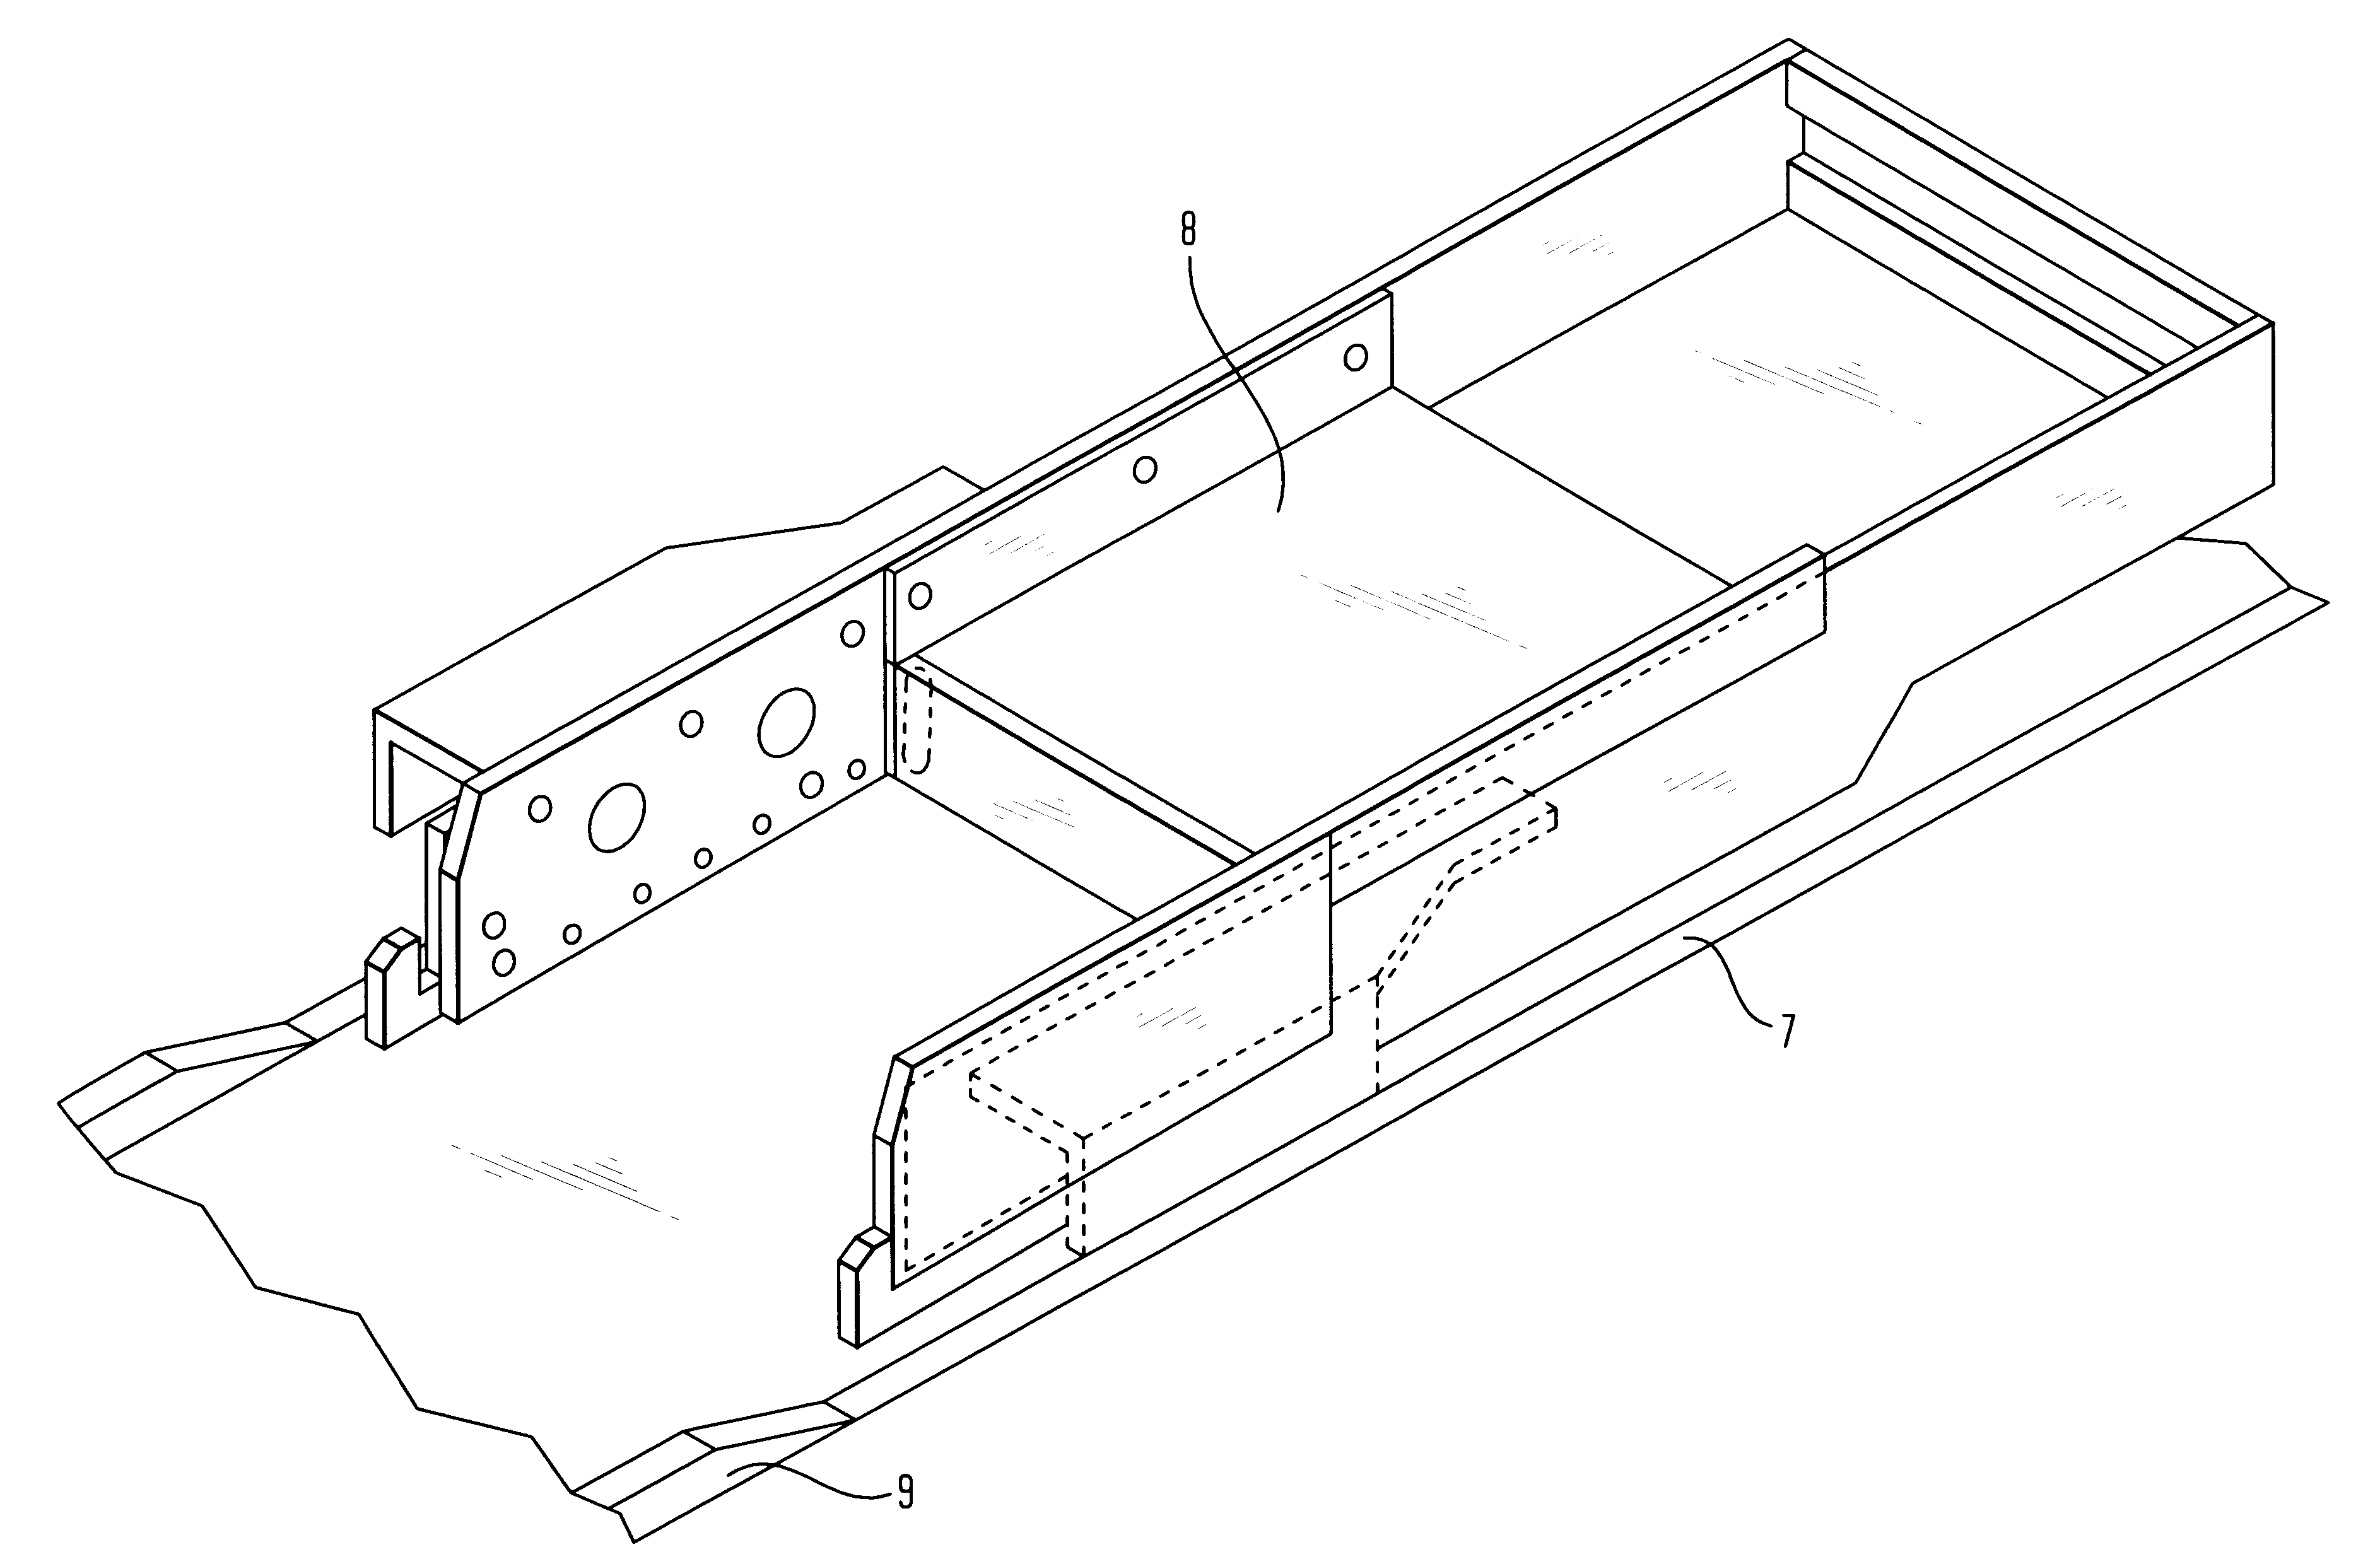 Apparatus for manufacturing concrete masonry units